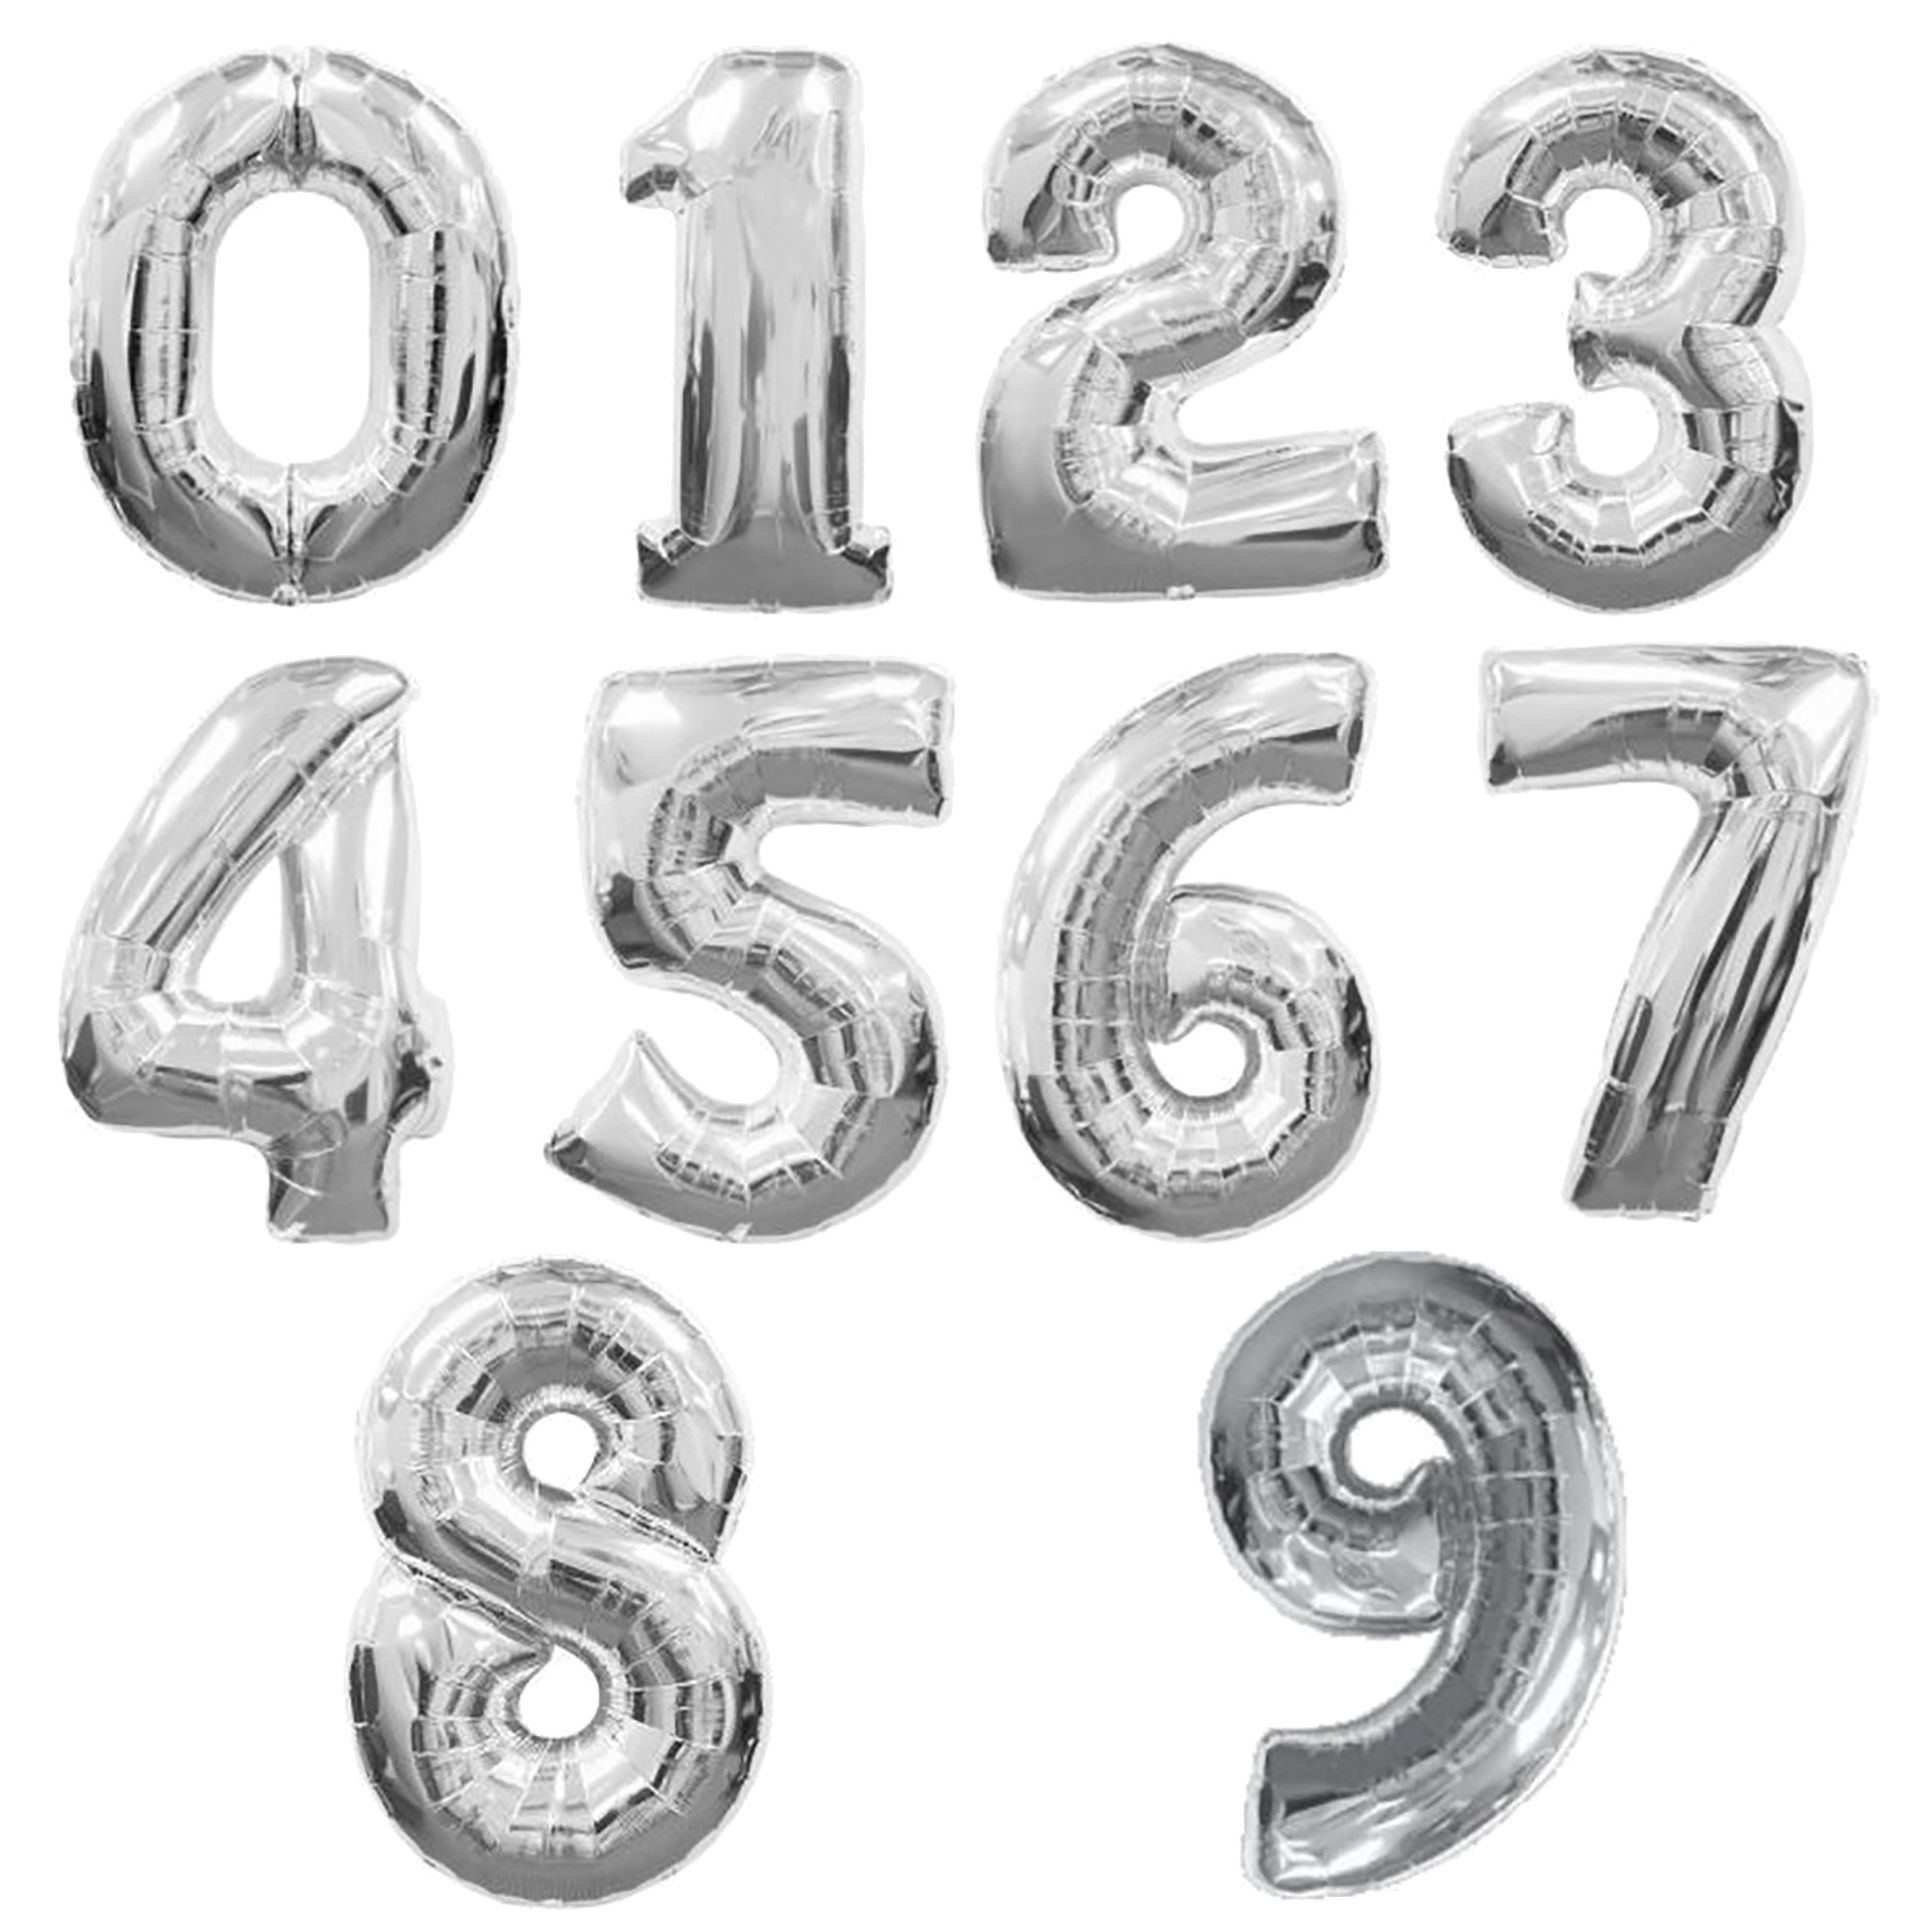 Silver Numbers